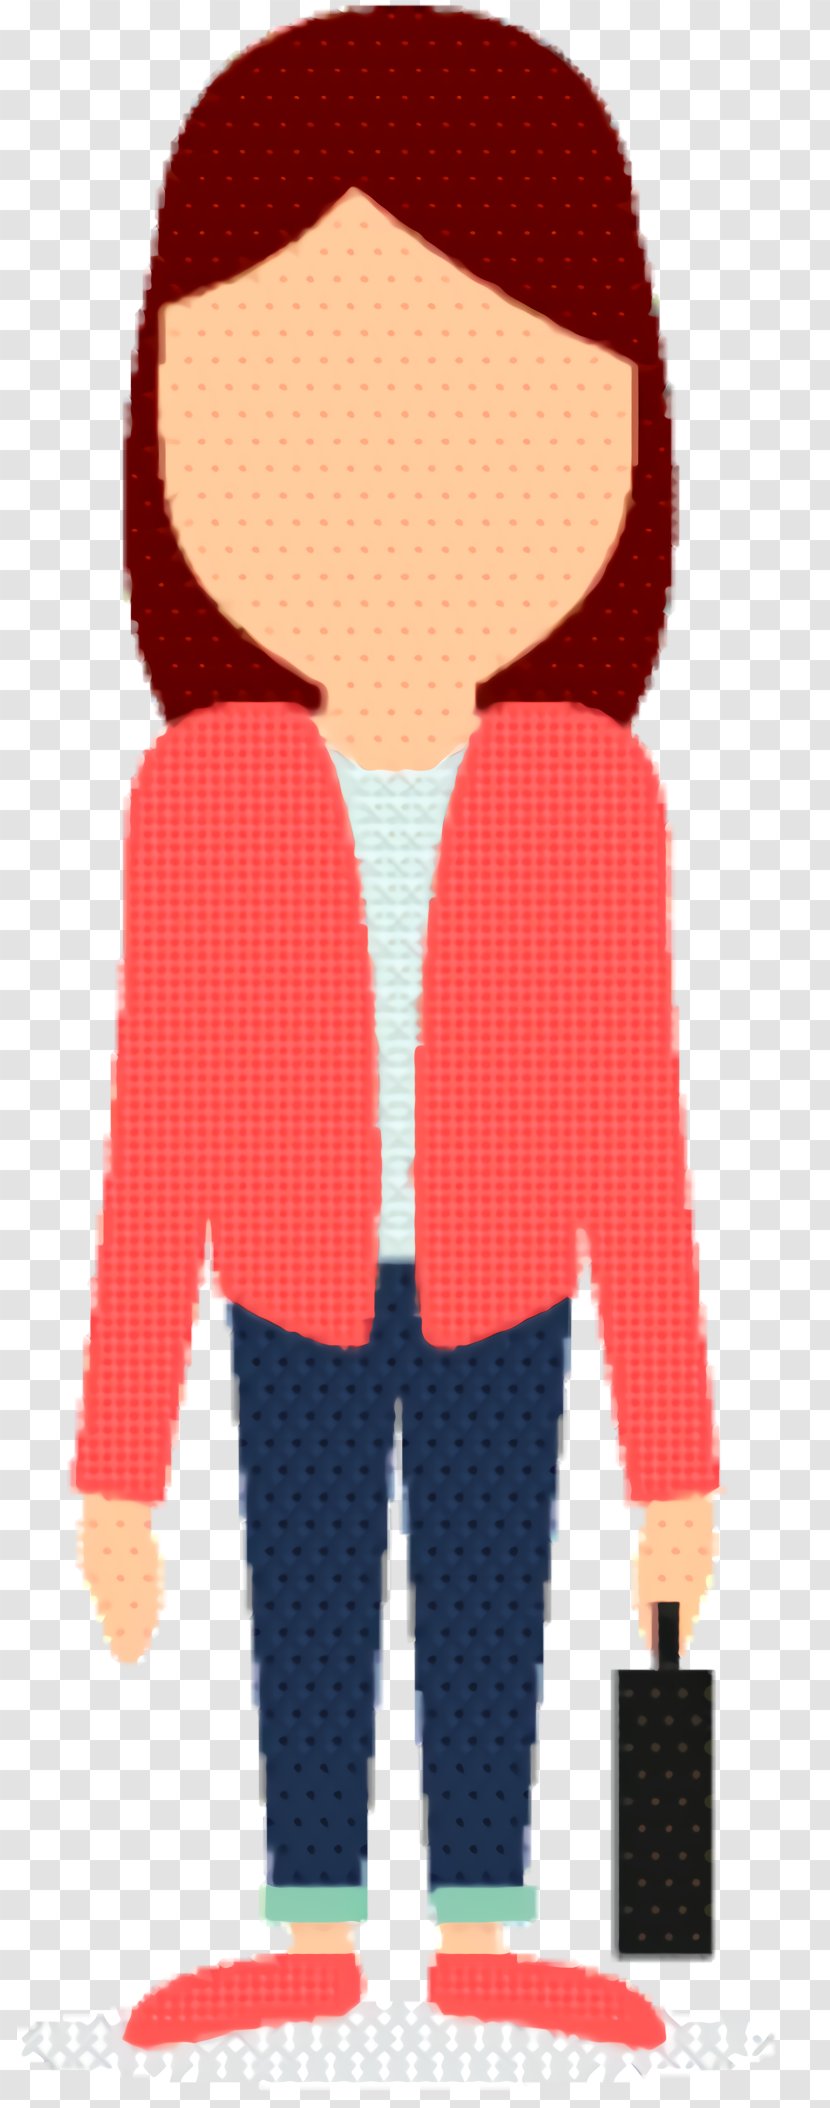 Painting Cartoon - Sweater - Child Smile Transparent PNG